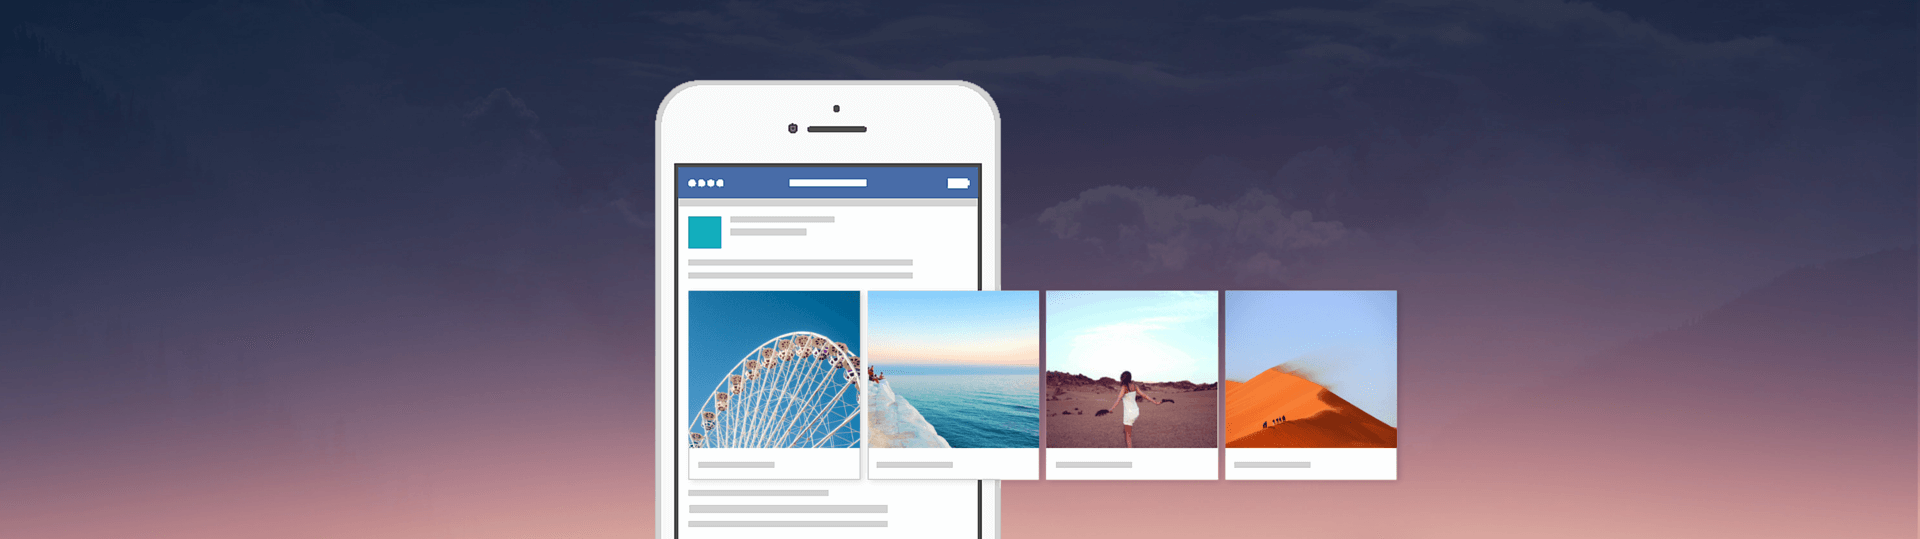 How to Snatch a Competitive Advantage with Facebook and Instagram Carousel Ads